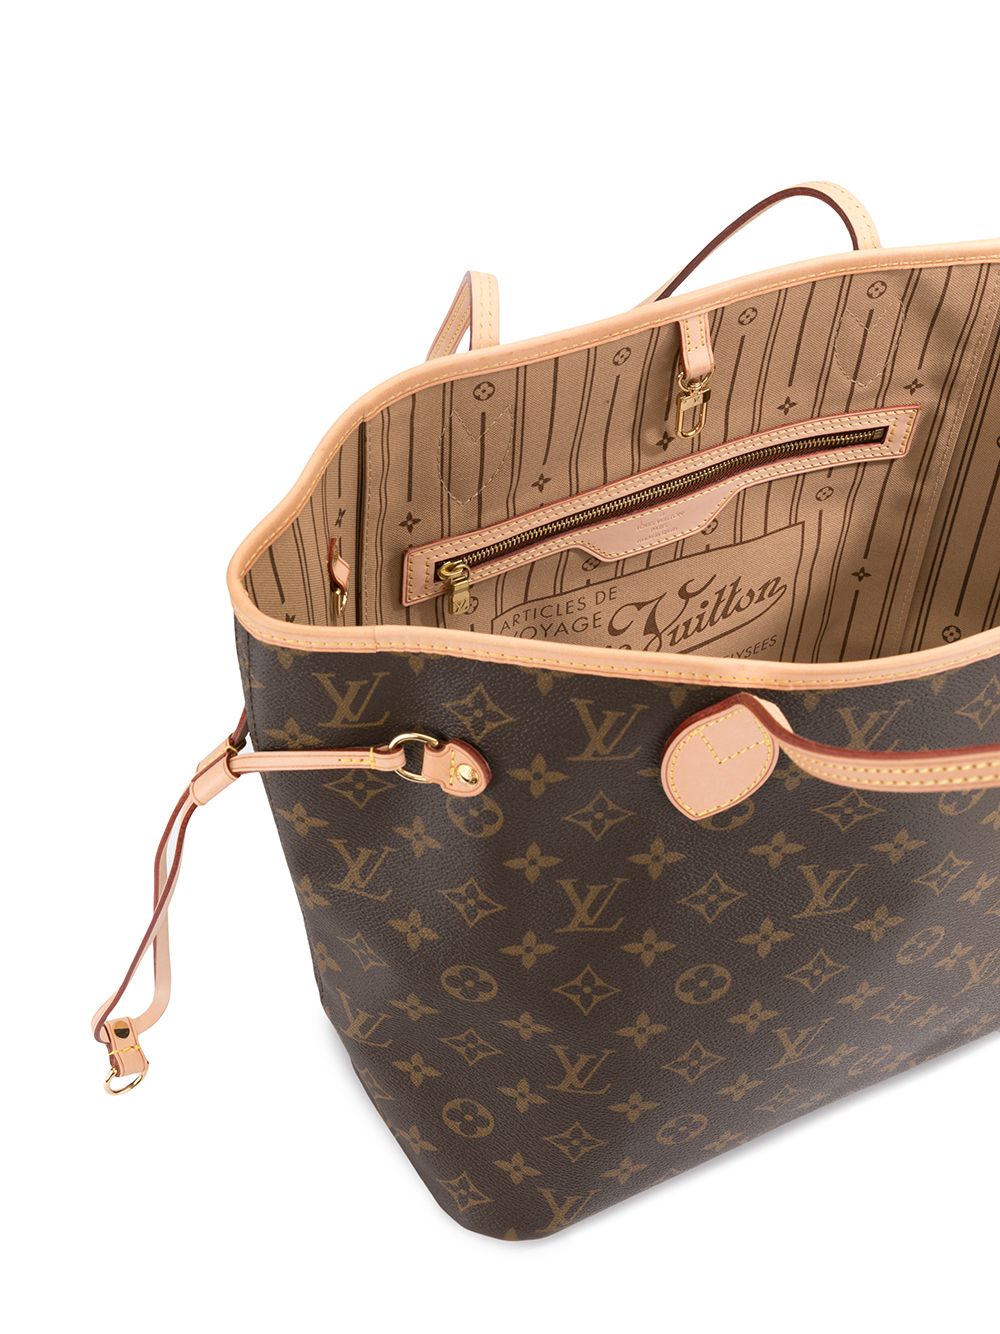 Louis Vuitton 2010 pre-owned Neverfull MM Tote Bag - Farfetch